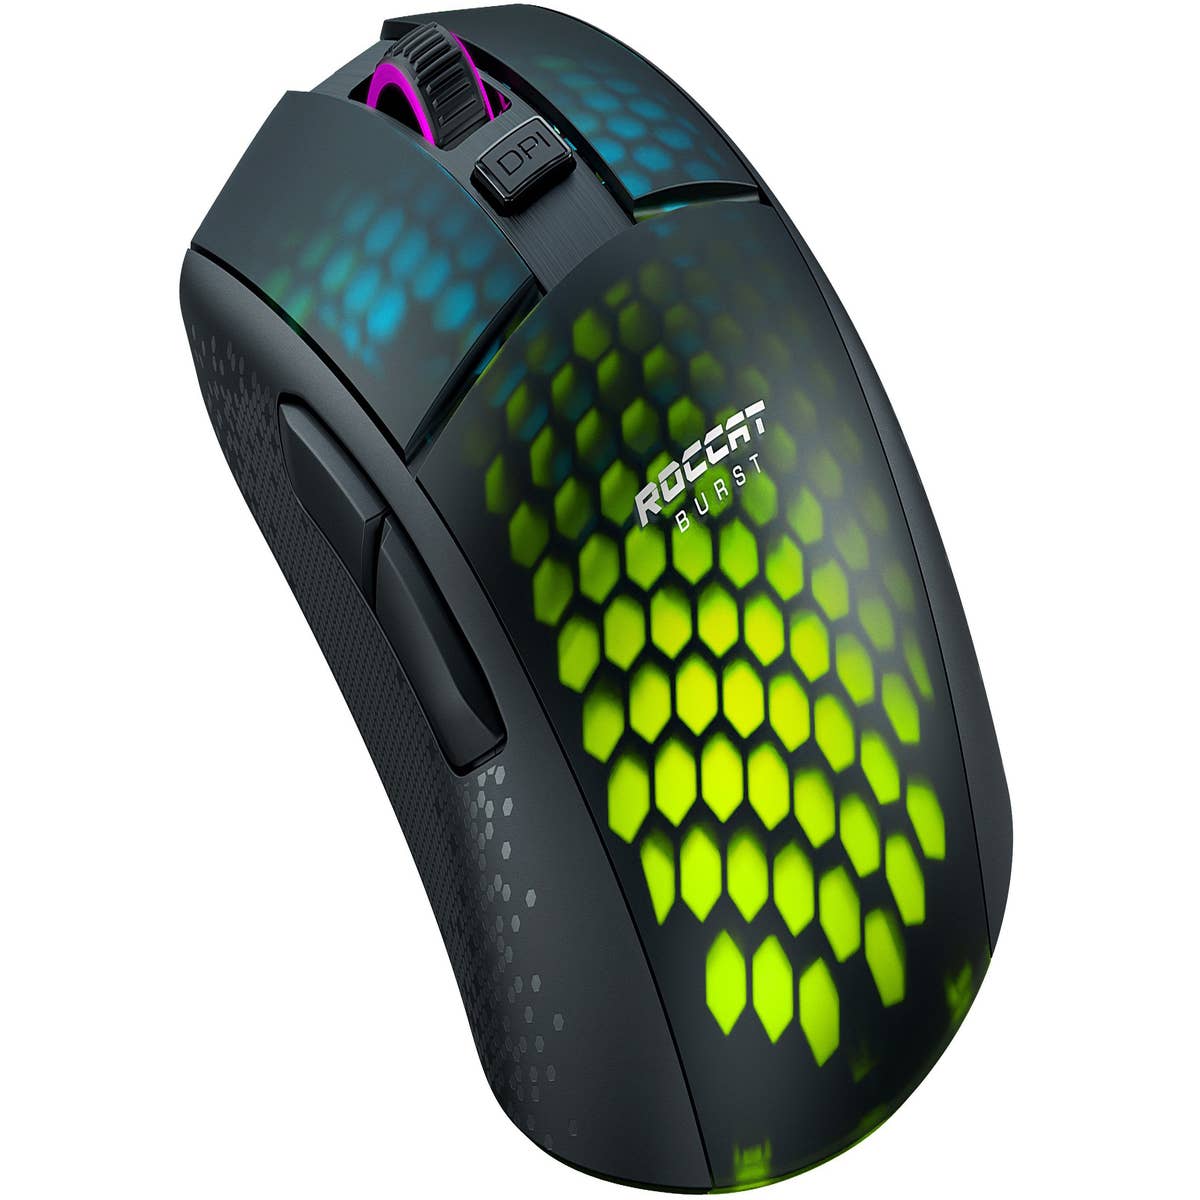 The Best FPS Gaming Mouse In 2023 